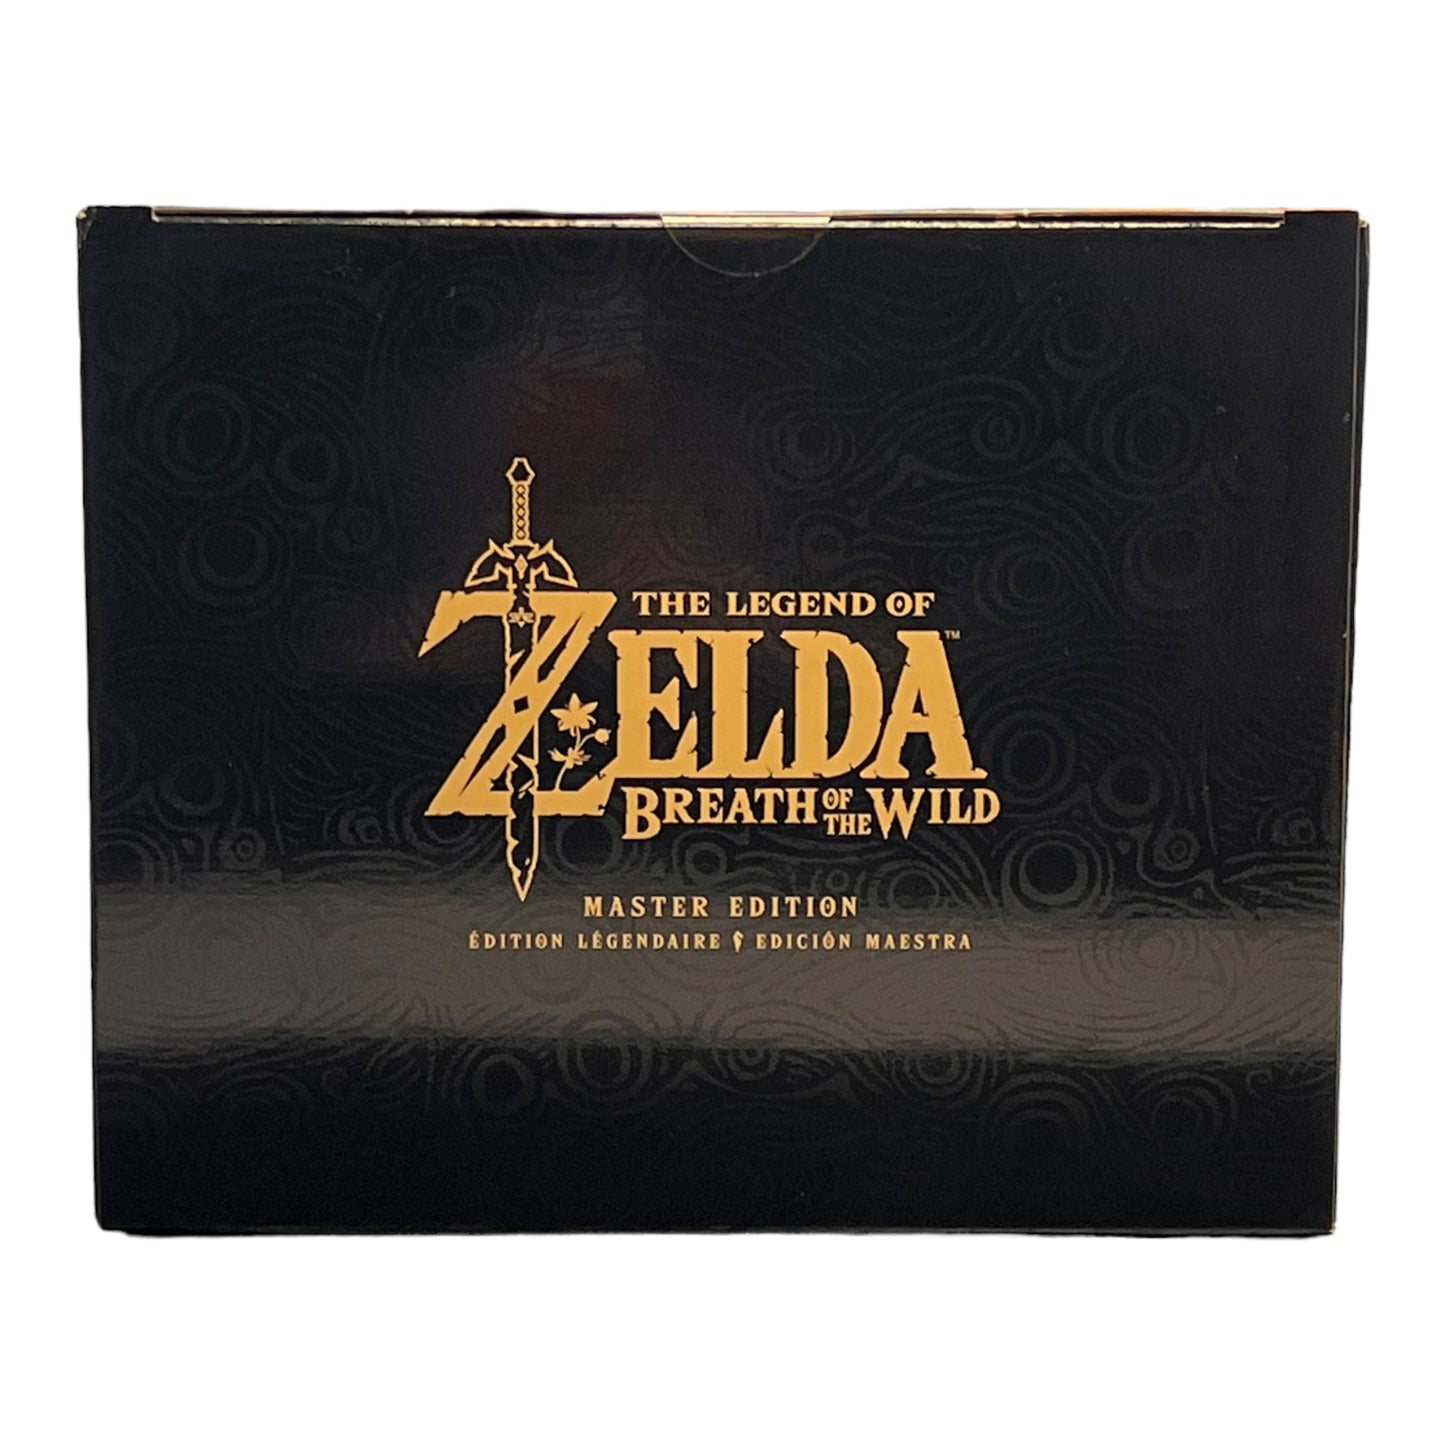 The Legend of Zelda: Breath of the Wild Master Edition - Sealed